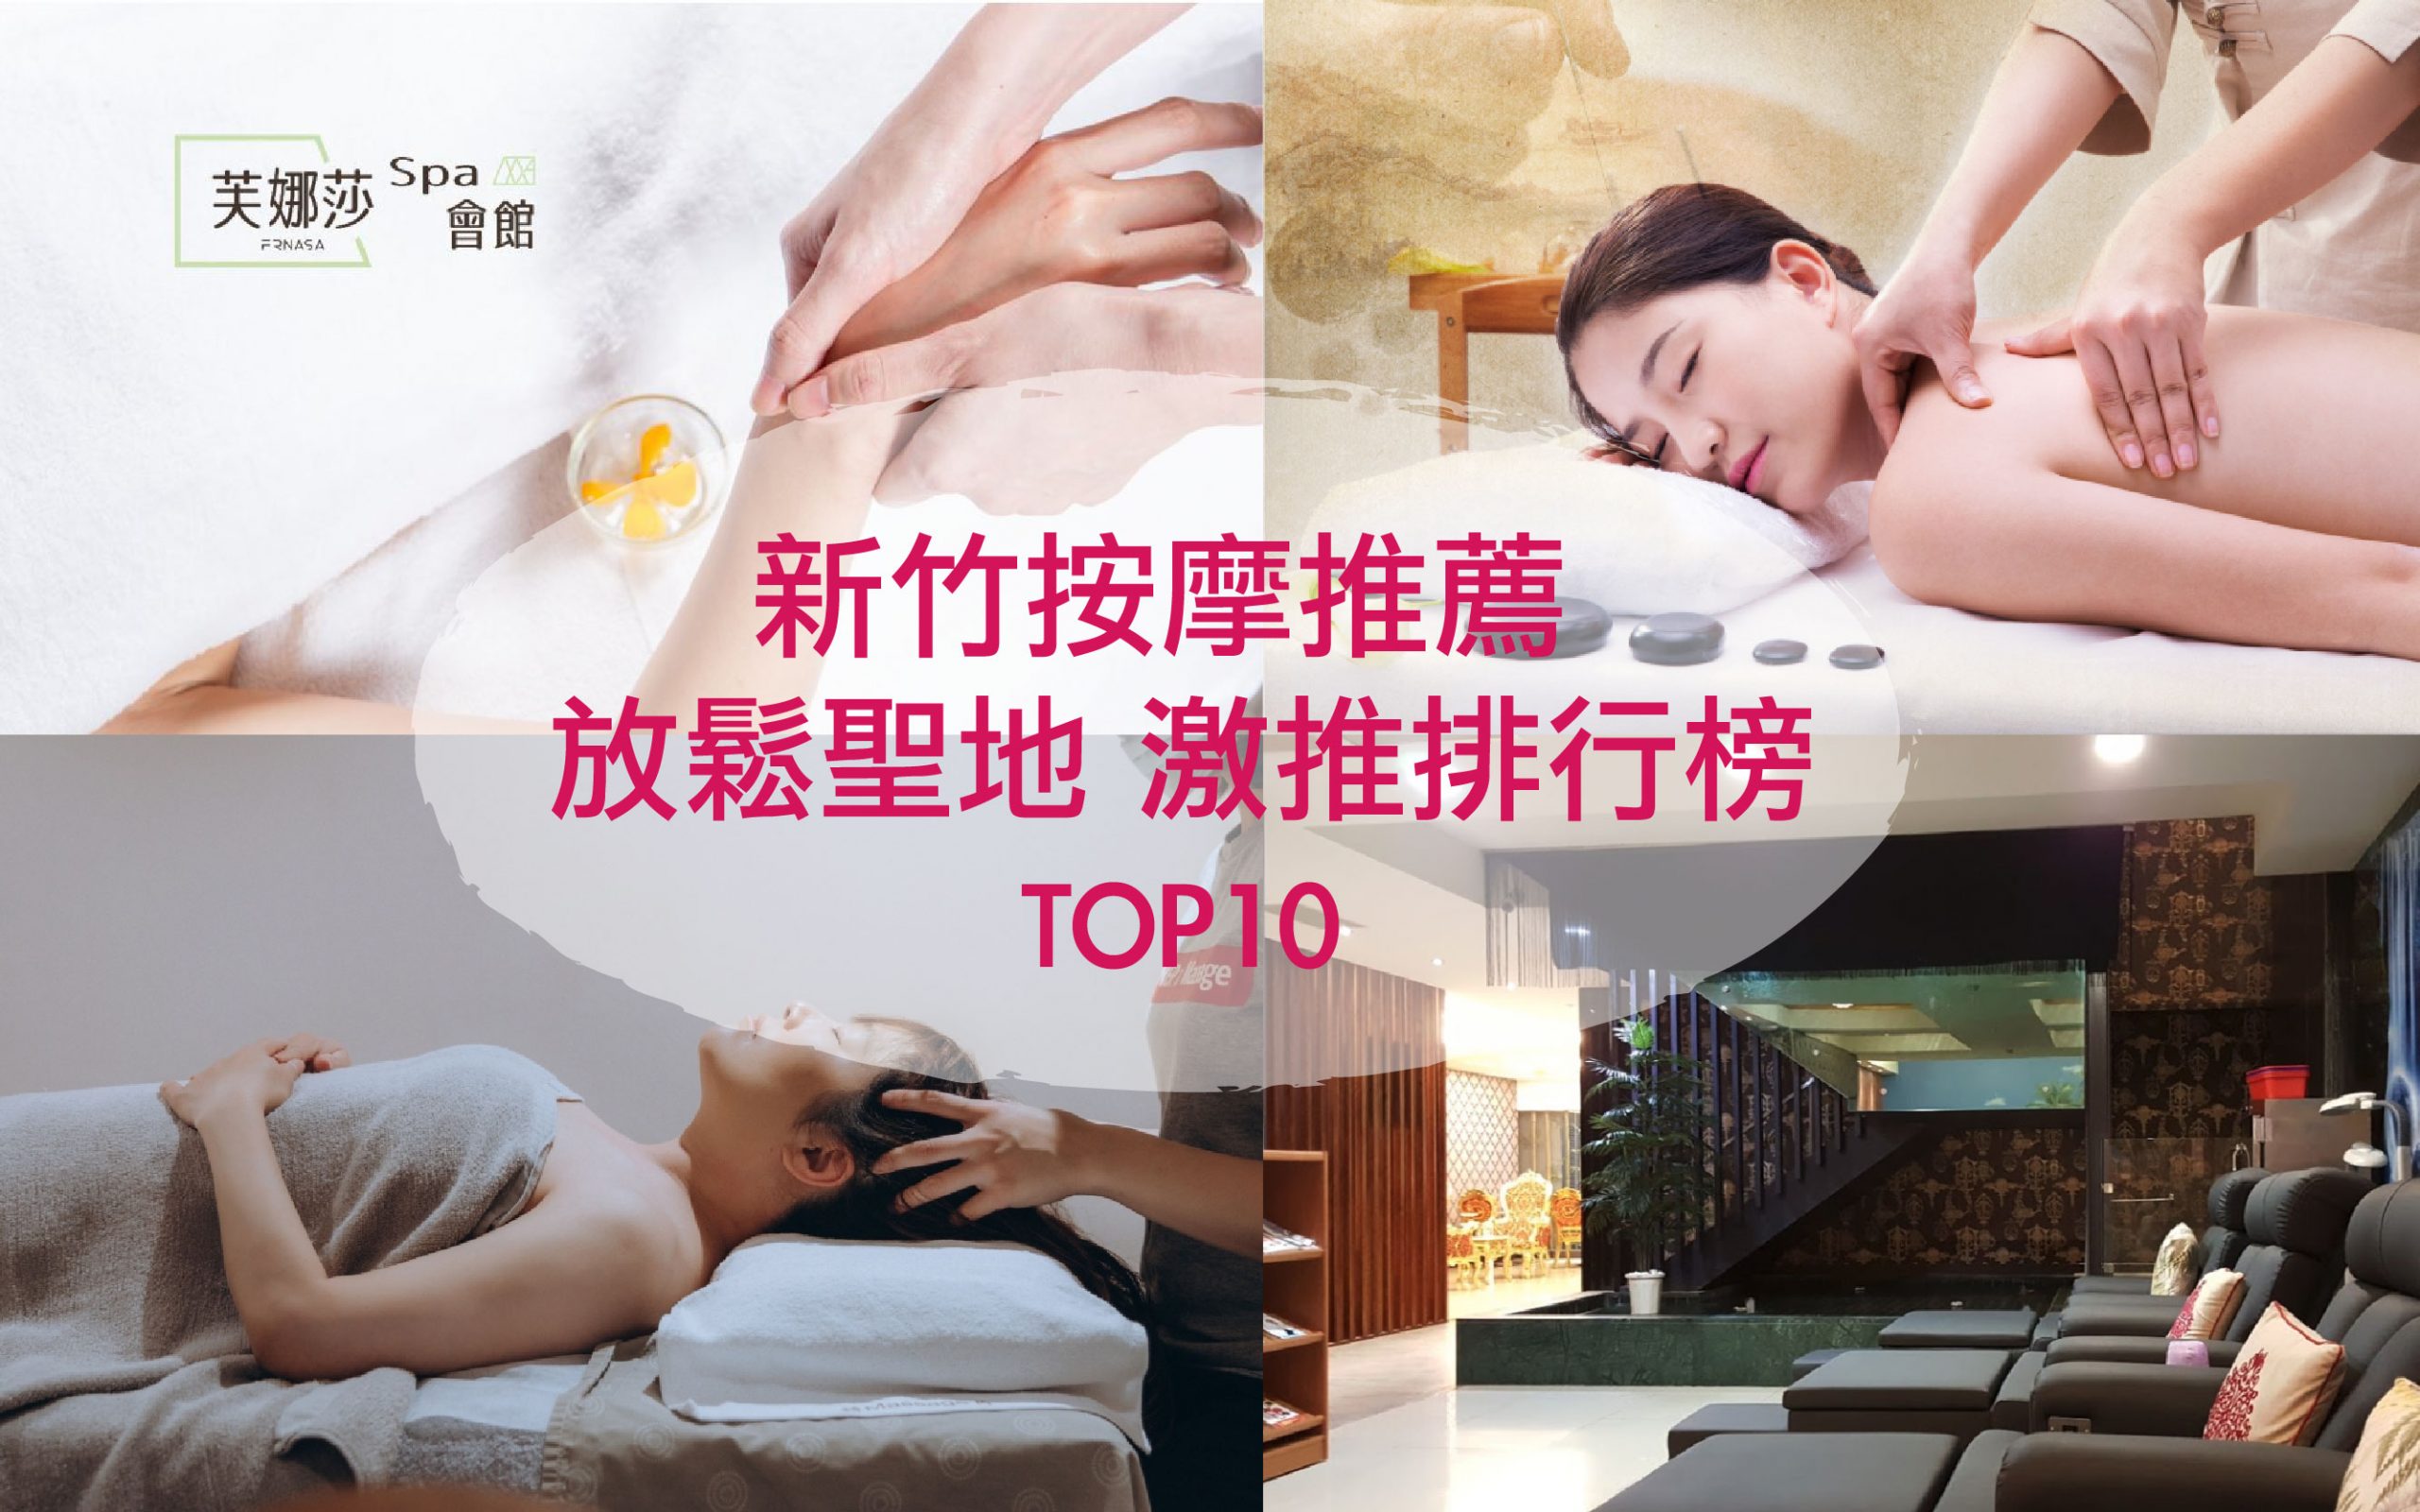 Relax33SPA: Truly Awesome Massage Therapy in Taipei @東南亞投資報告